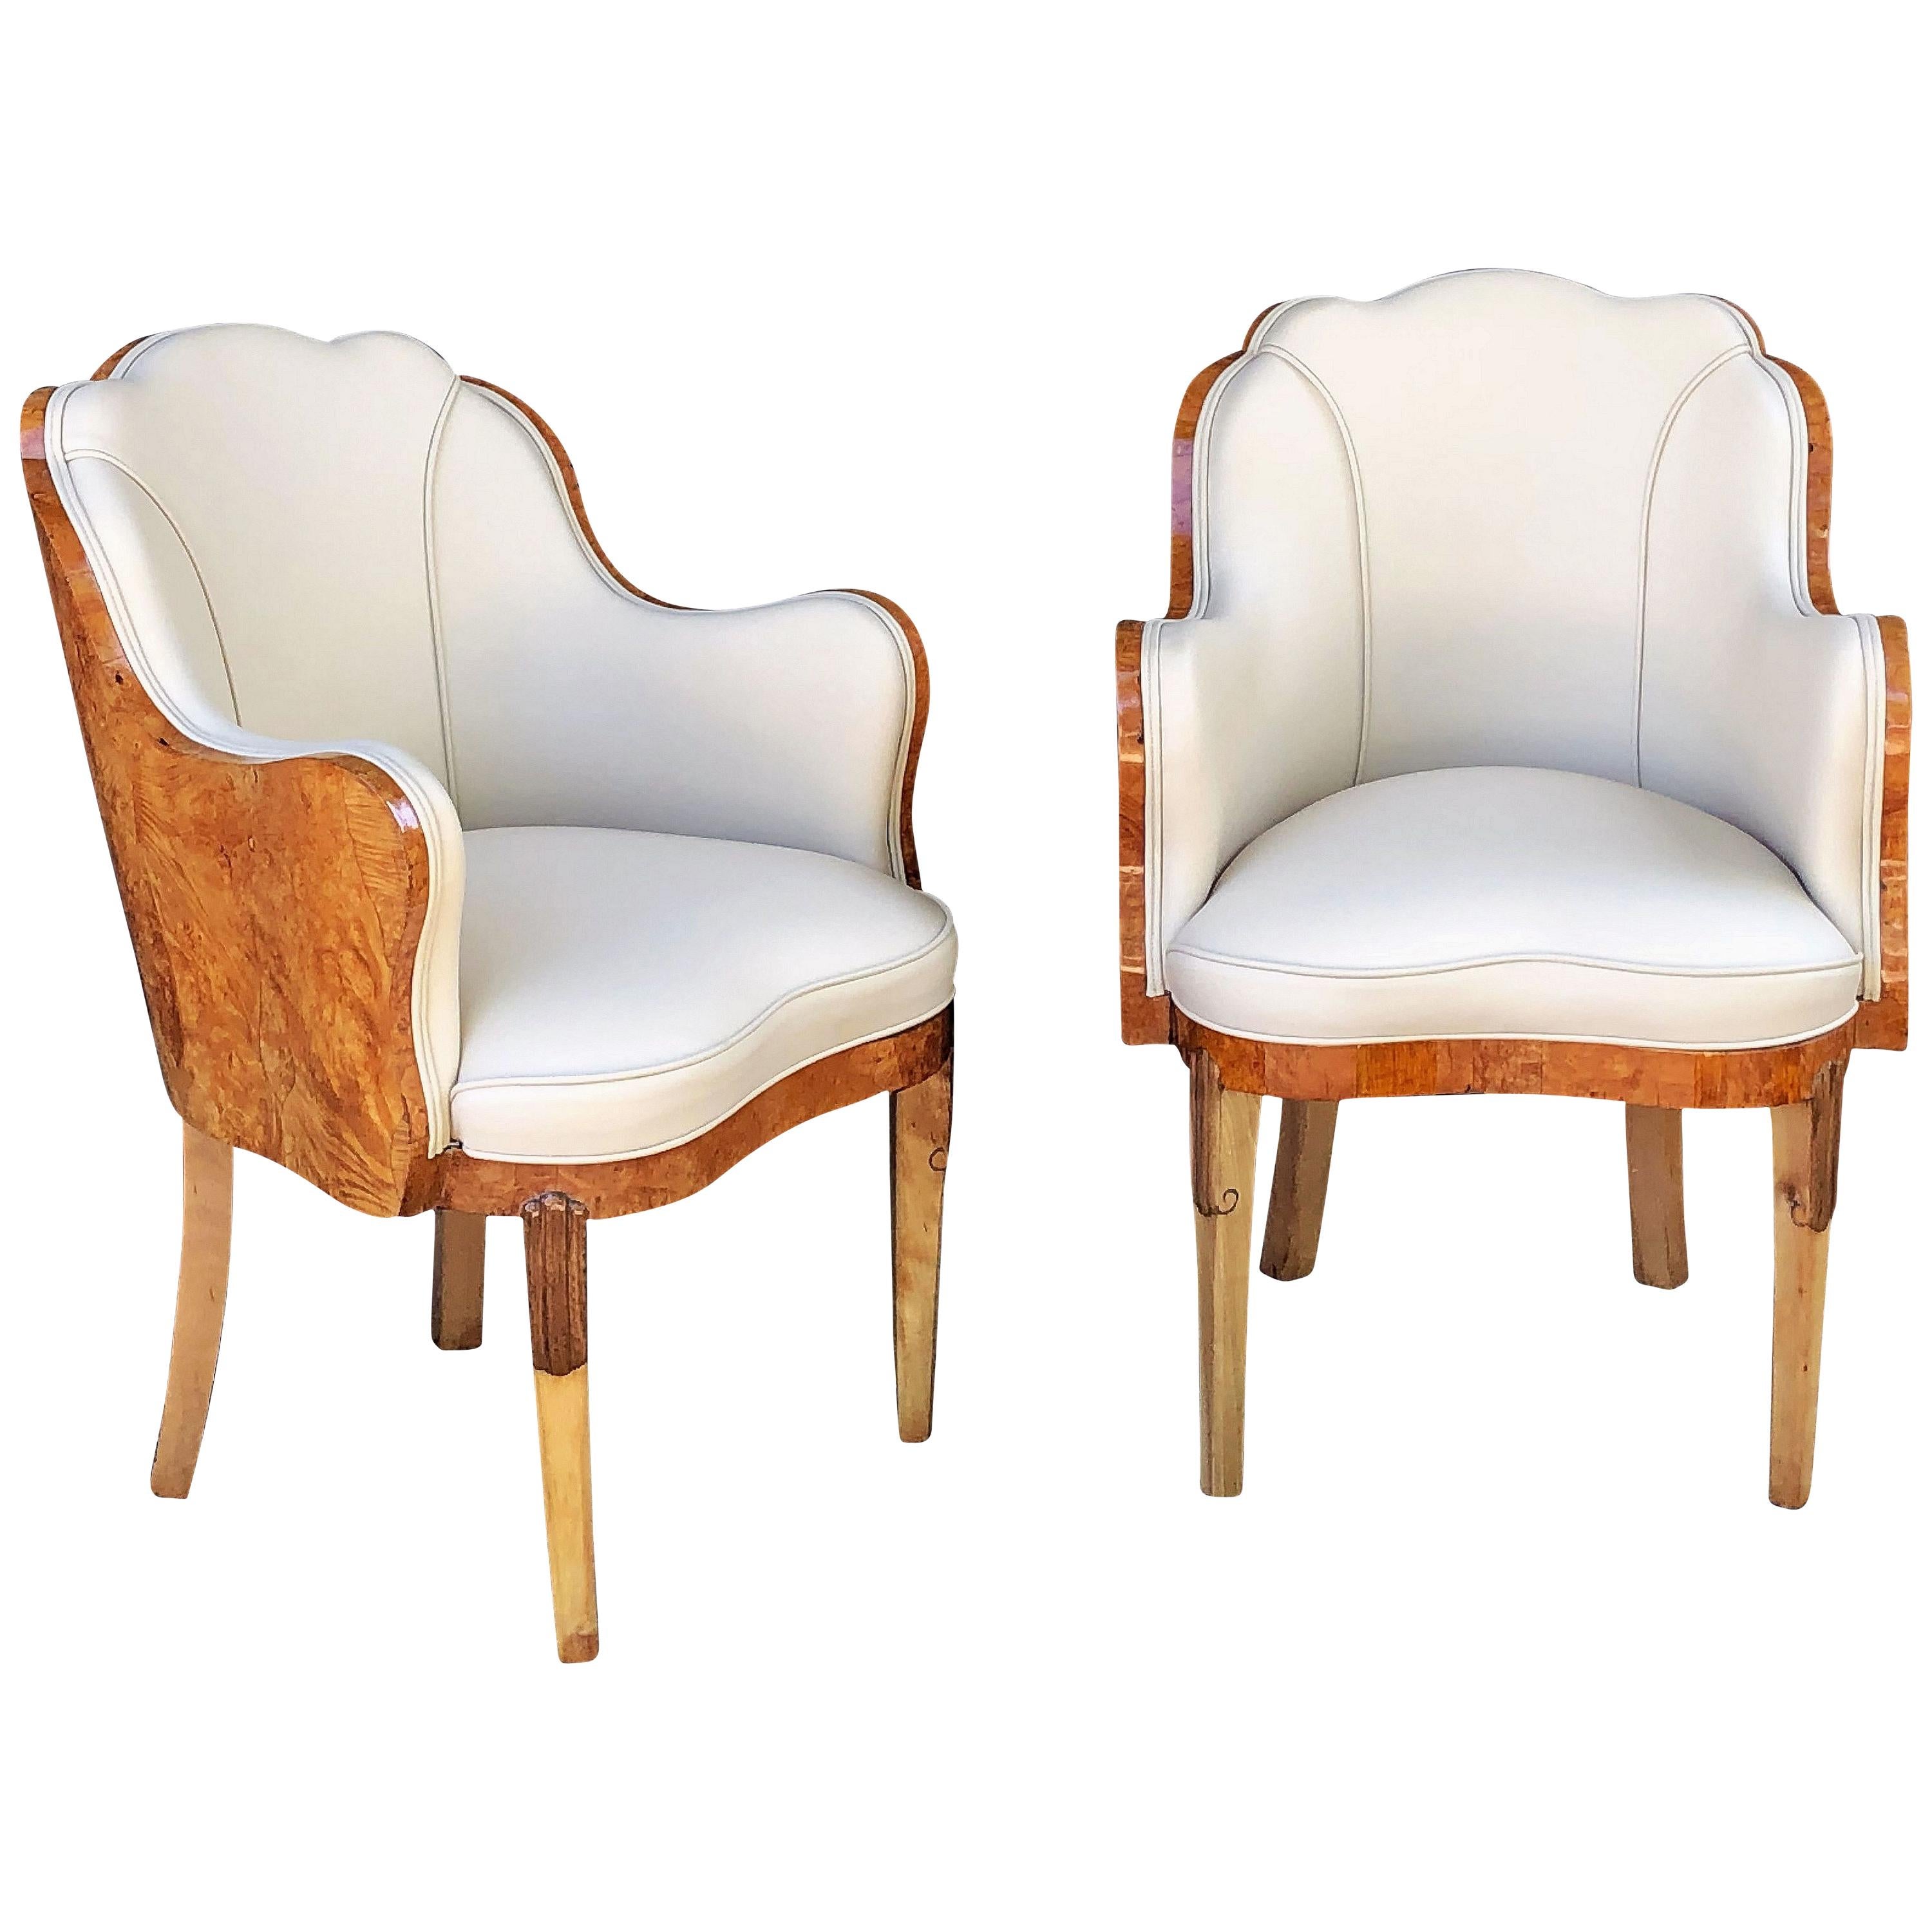 Art Deco Burr Walnut and Cream Leather Armchairs by Maurice Adams 'Priced Each'